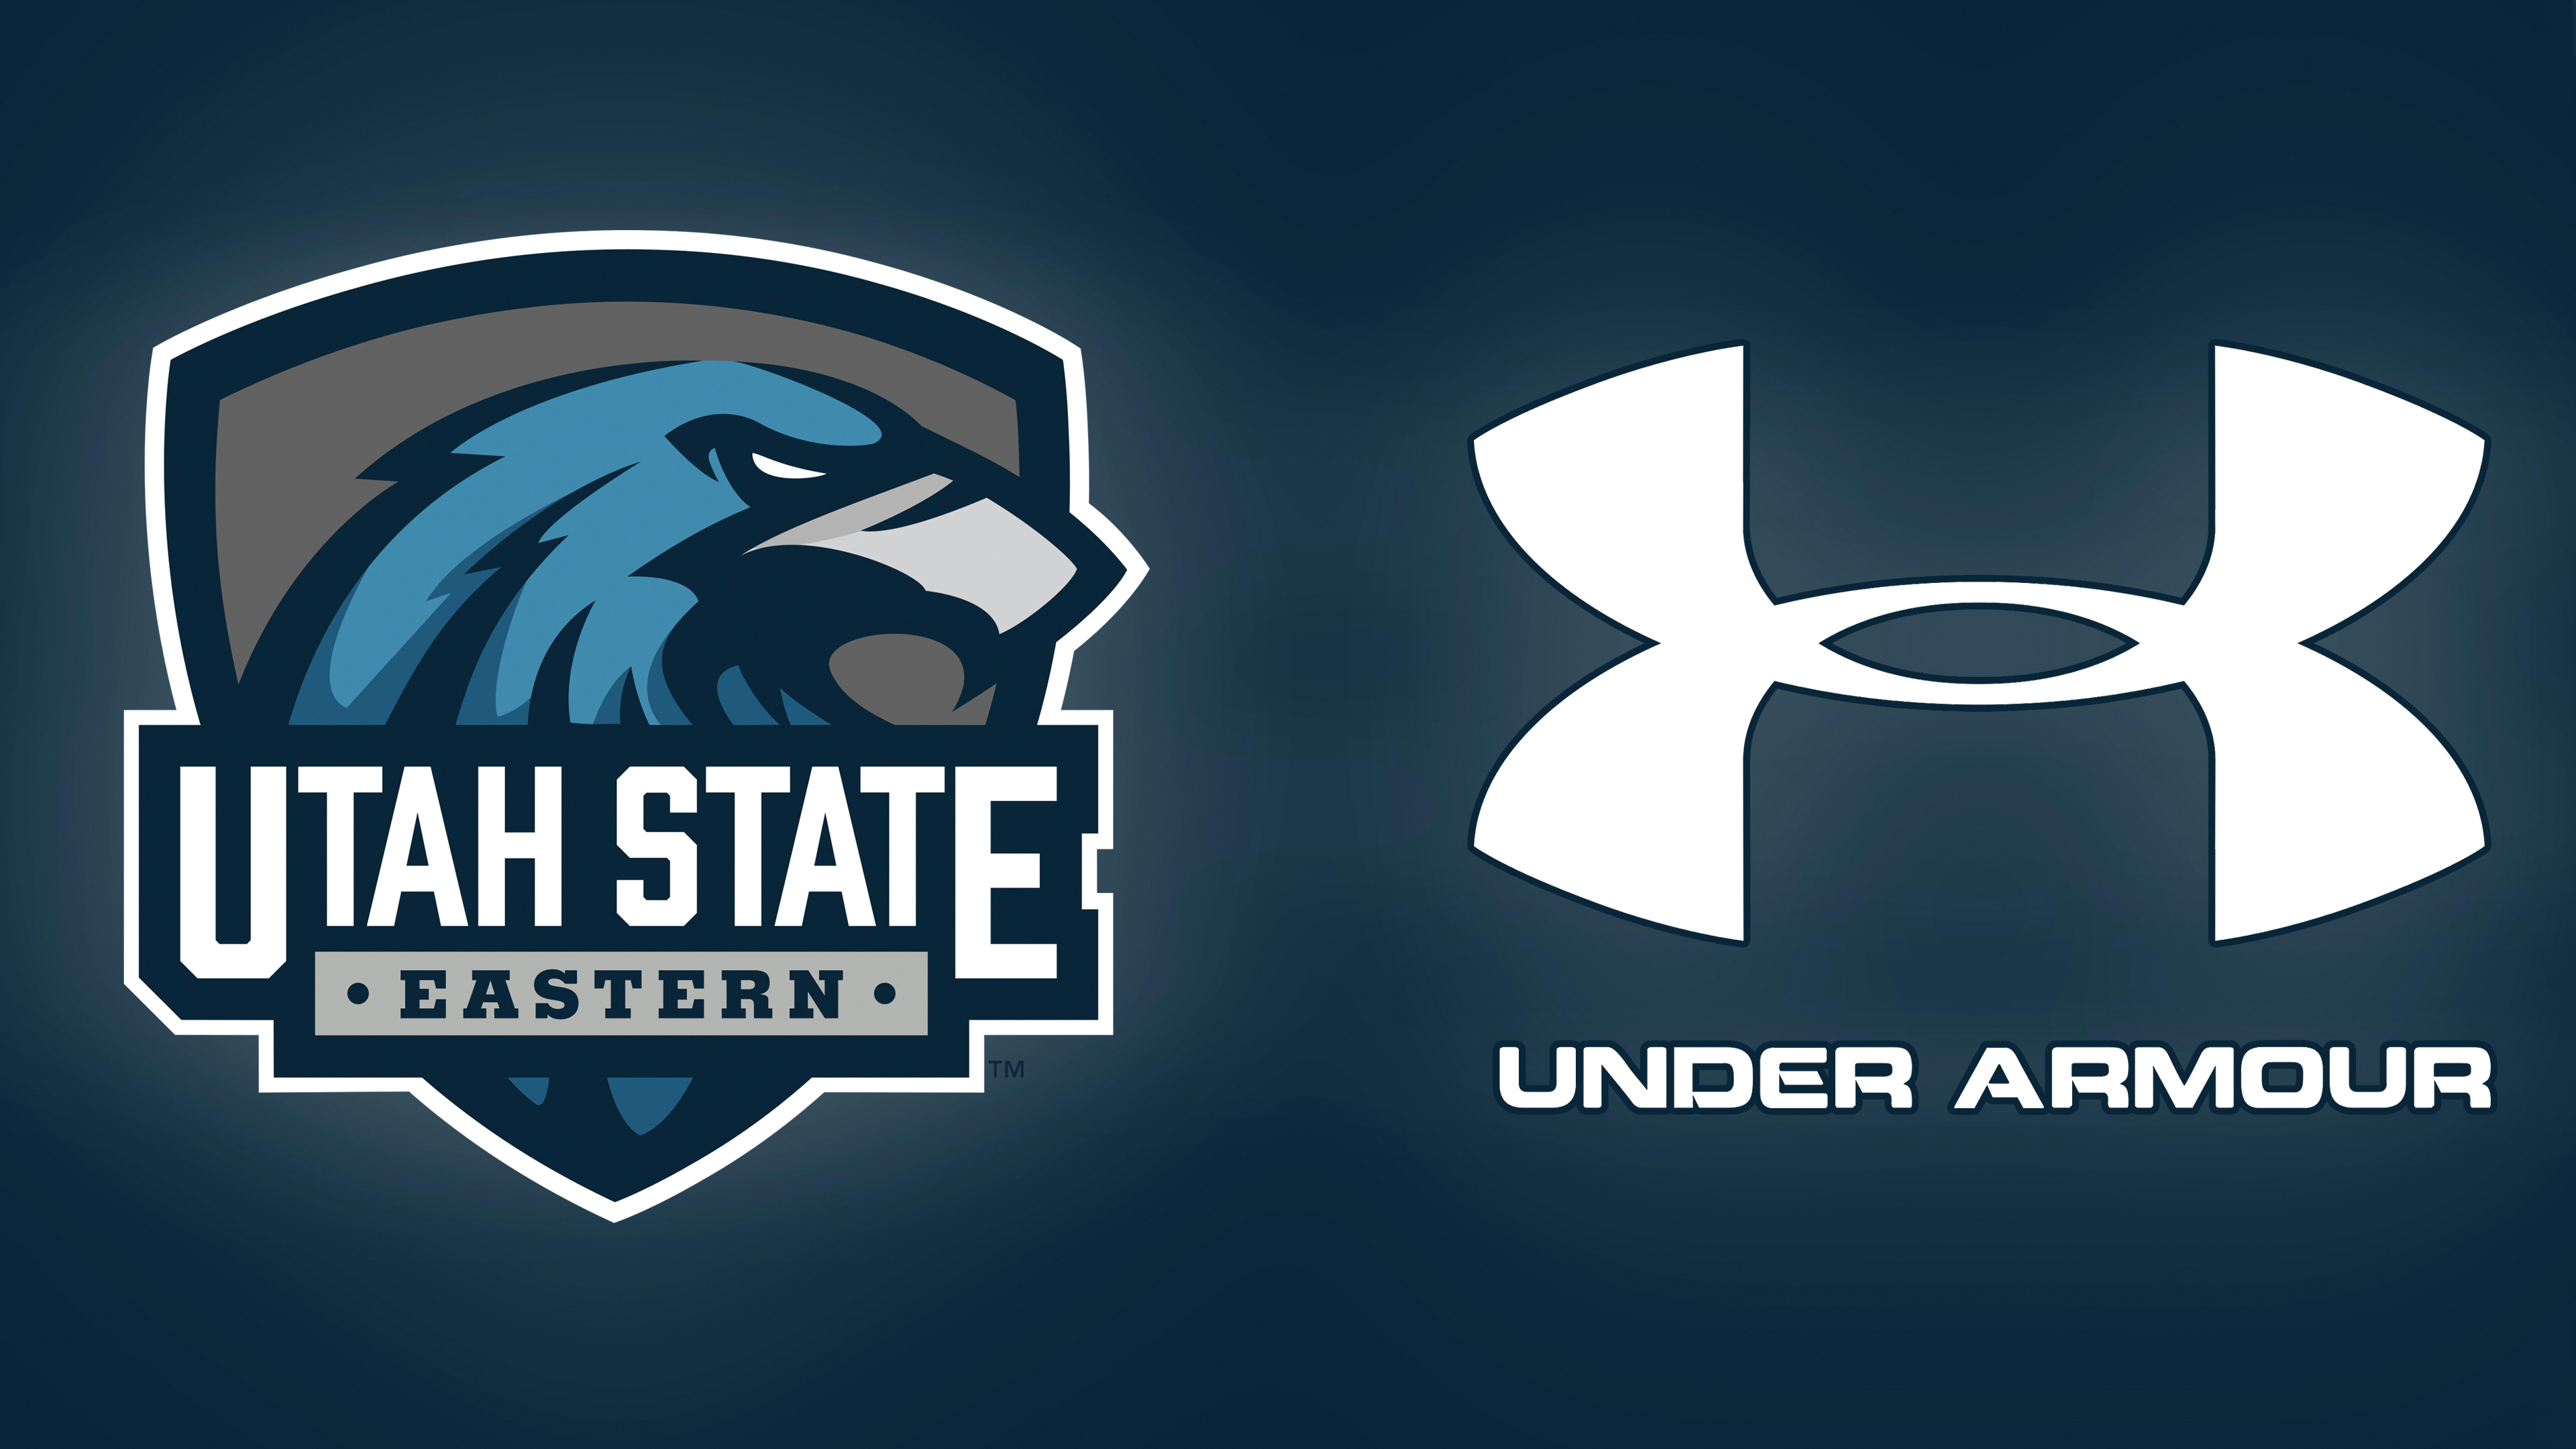 Cool Under Armour Wallpaper 12 of 40 with USU Eastern